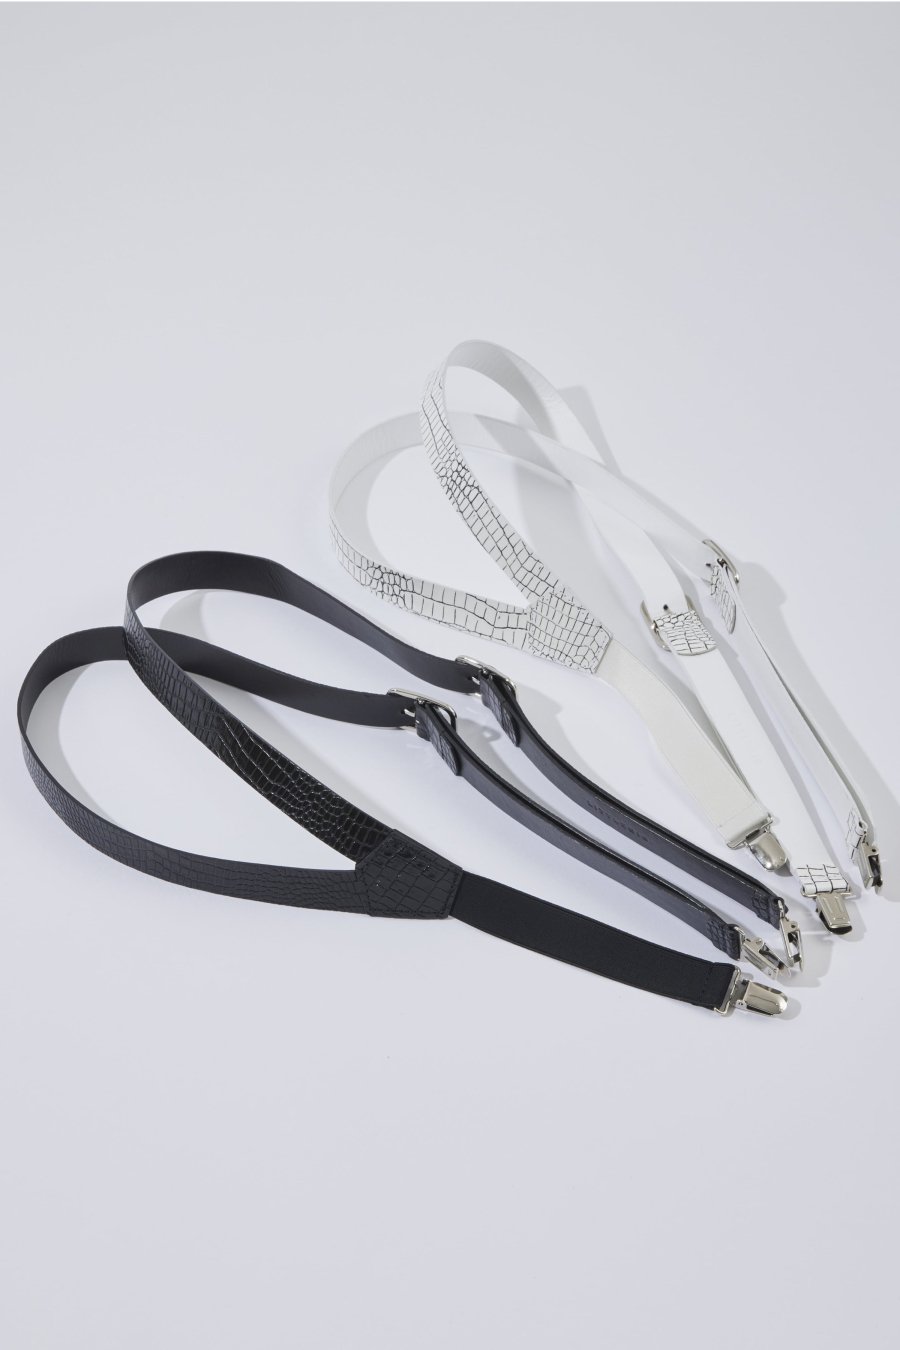 LITTLEBIG  Crocodile Suspenders(White)<img class='new_mark_img2' src='https://img.shop-pro.jp/img/new/icons15.gif' style='border:none;display:inline;margin:0px;padding:0px;width:auto;' />